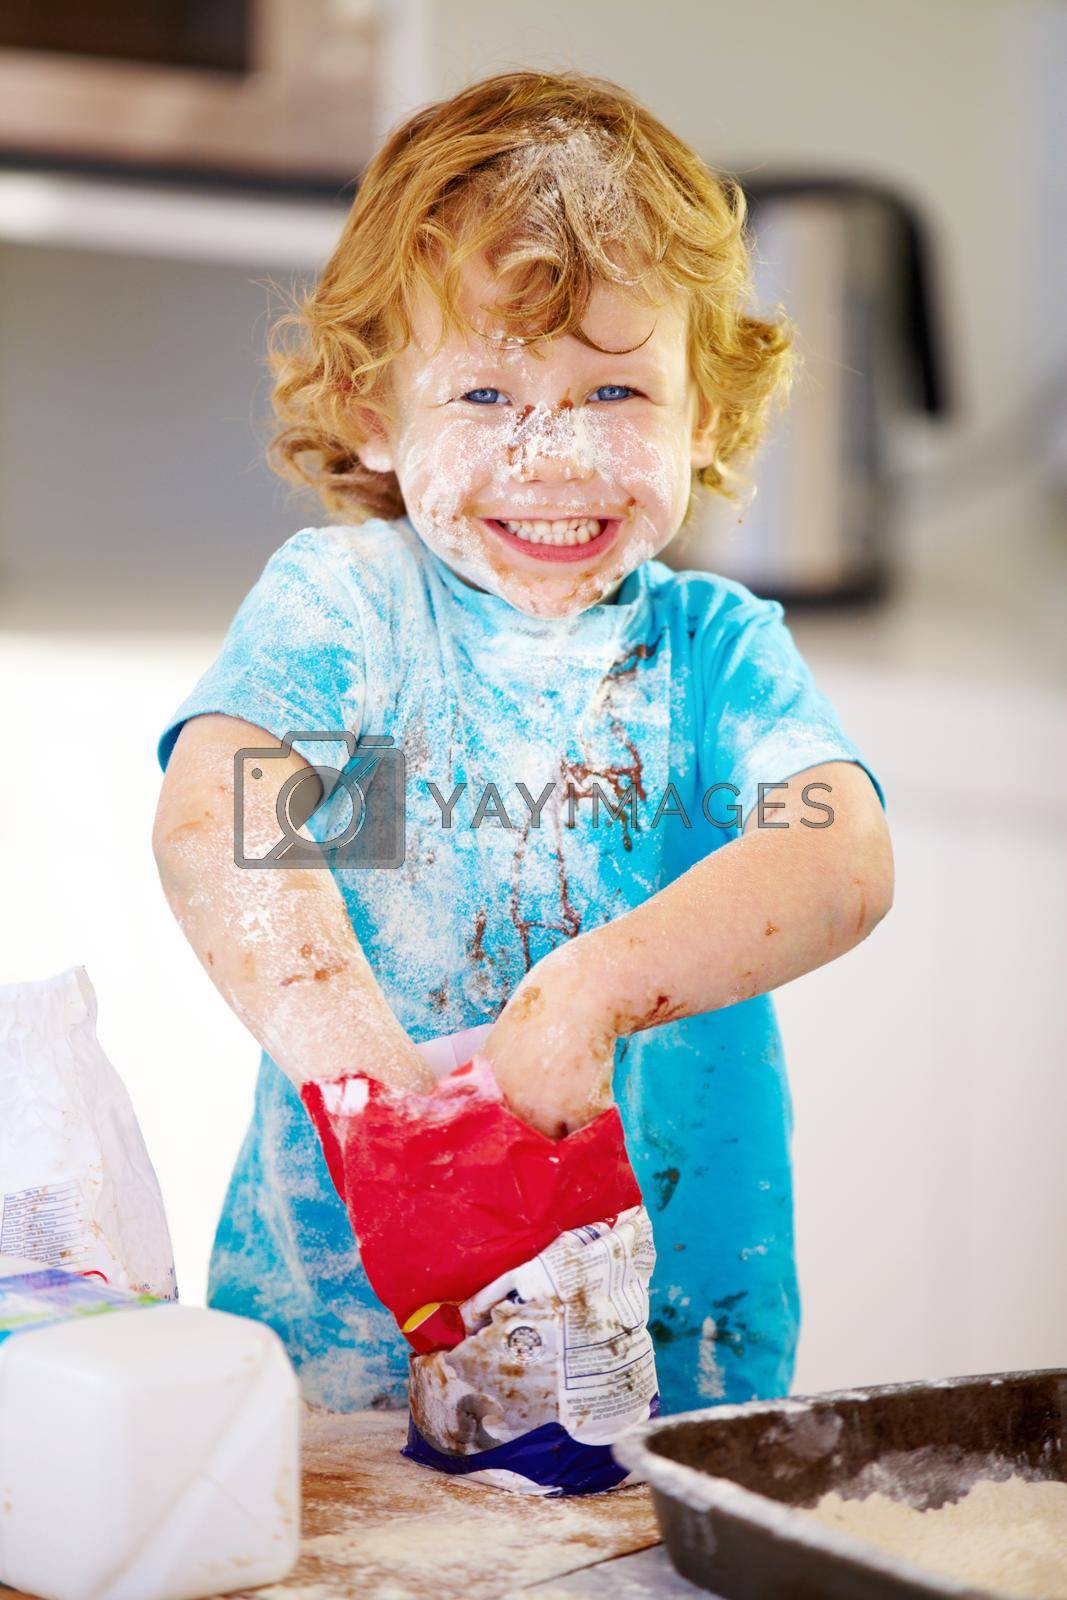 Royalty free image of The future of the culinary arts. A little boy covered in dough and flour. by YuriArcurs